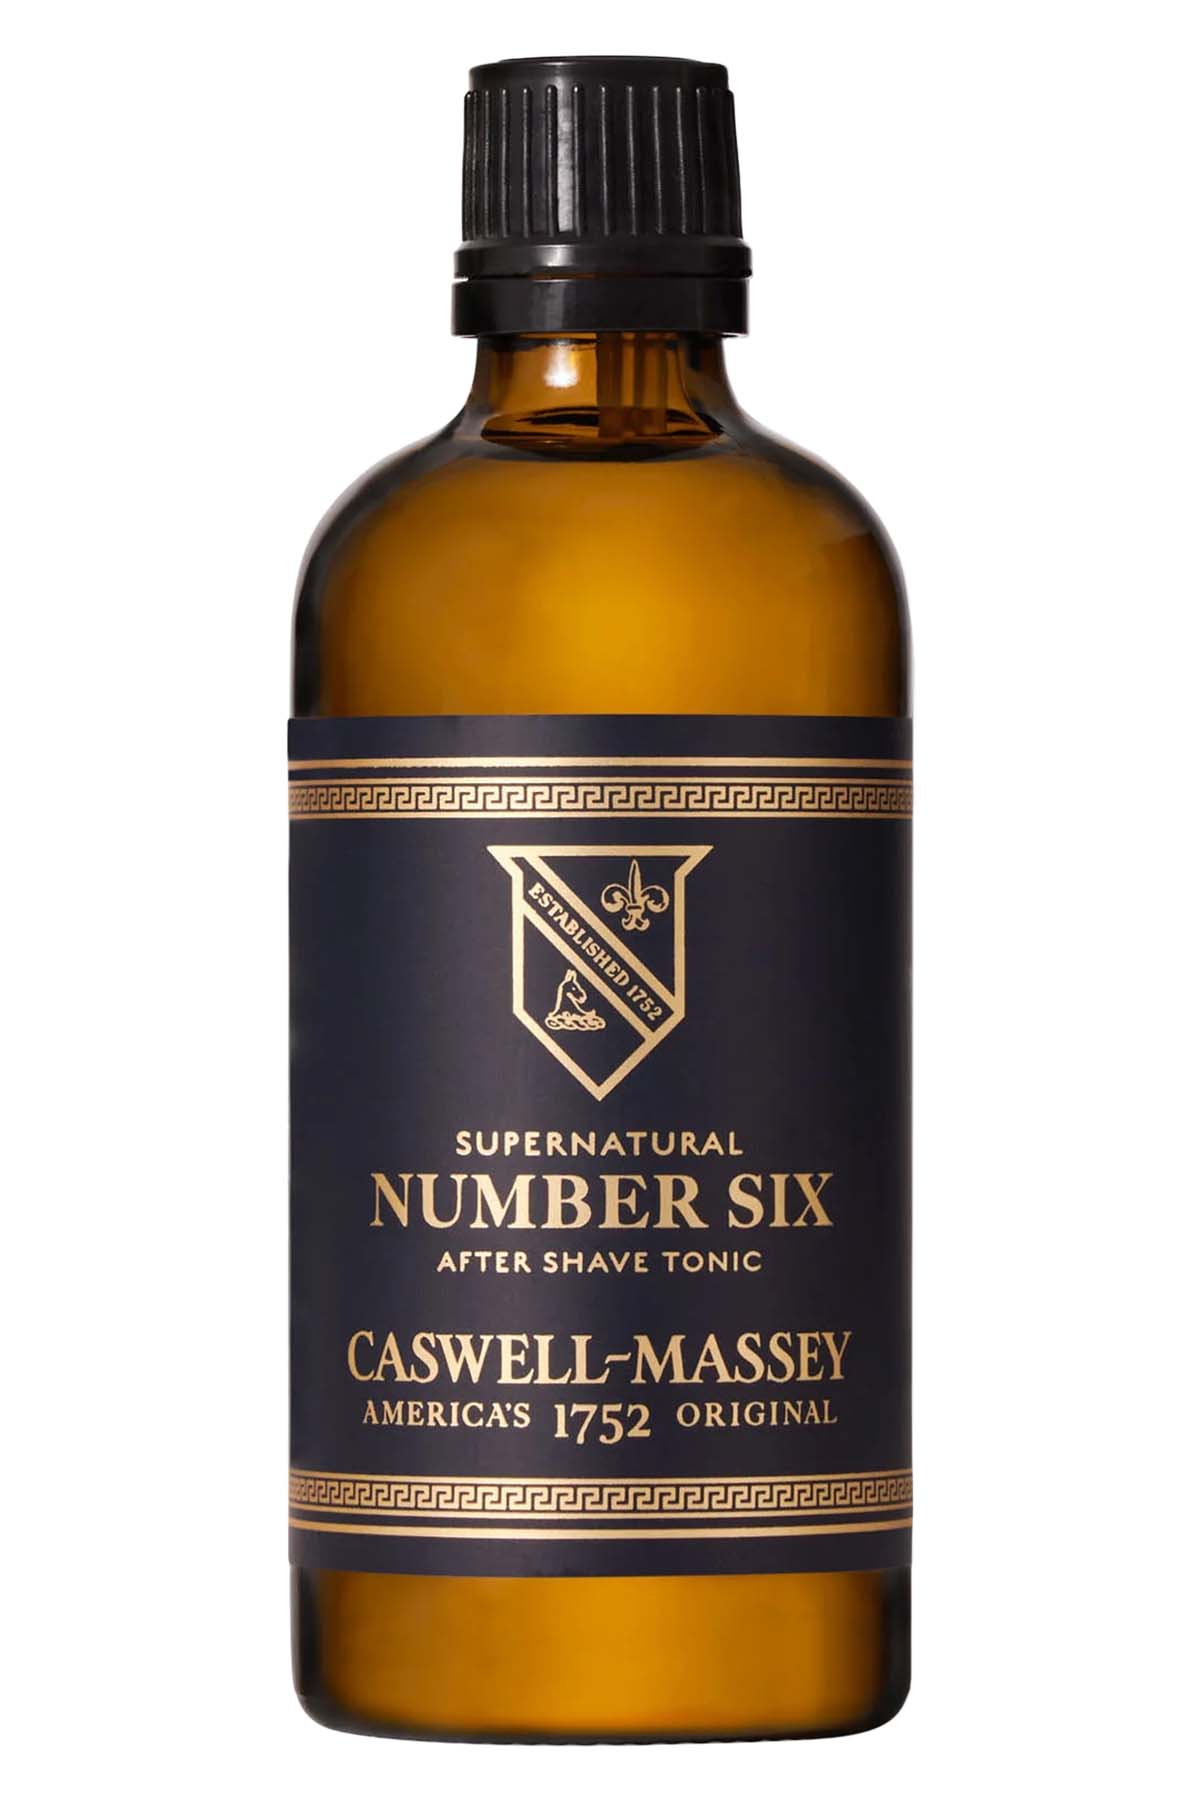 Caswell Massey Number Six After Shave Tonic